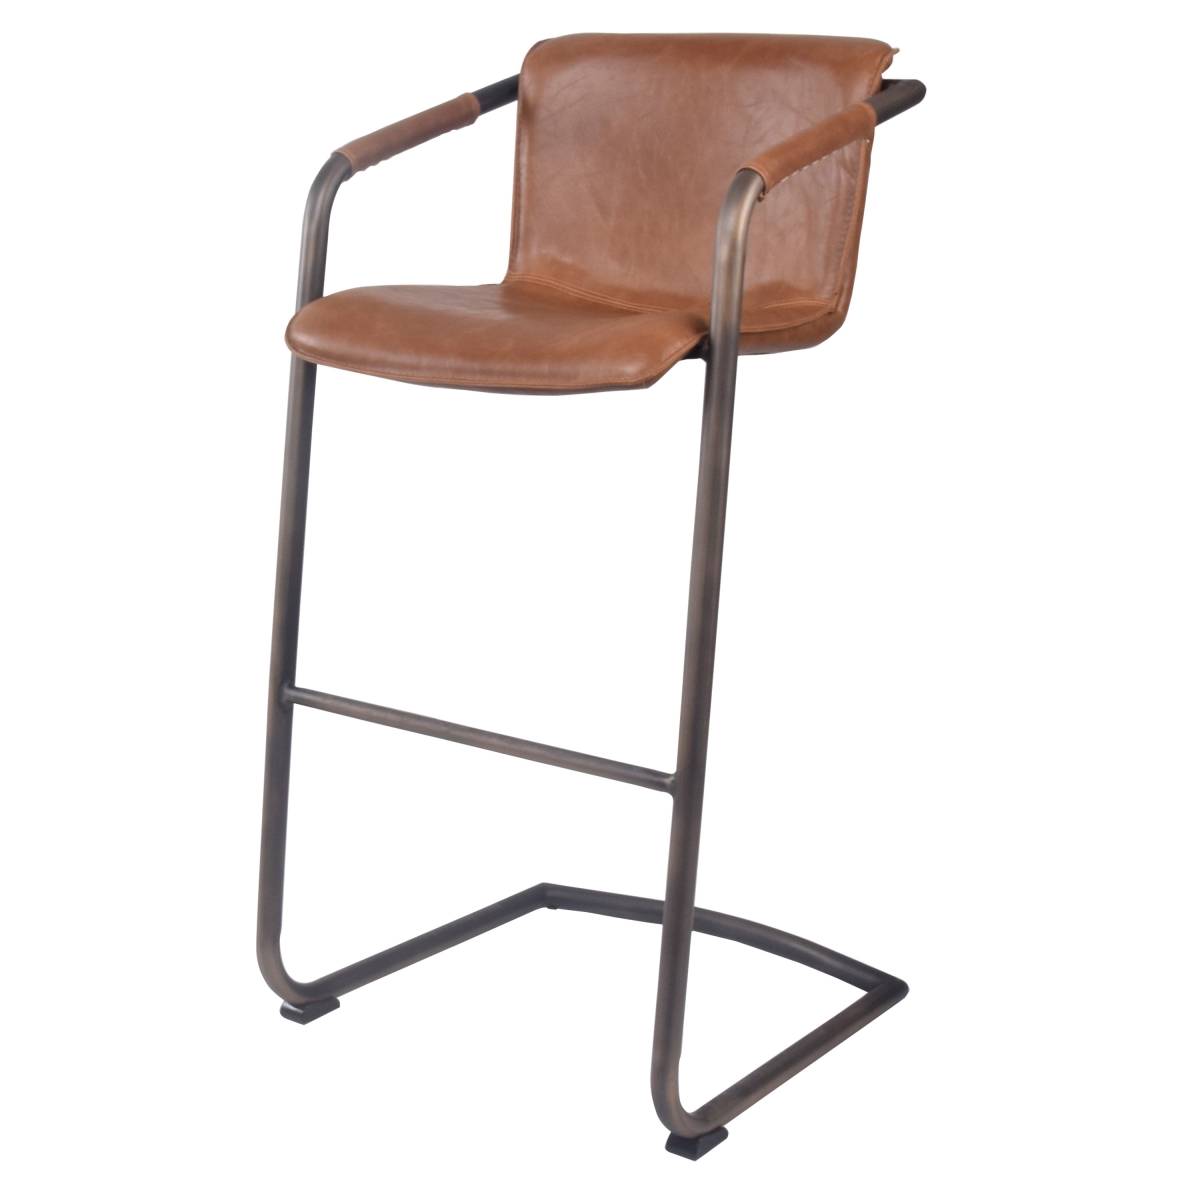 1060003-215 Indy Pu Leather Bar Stool, Antique Cigar Brown - Set Of 2